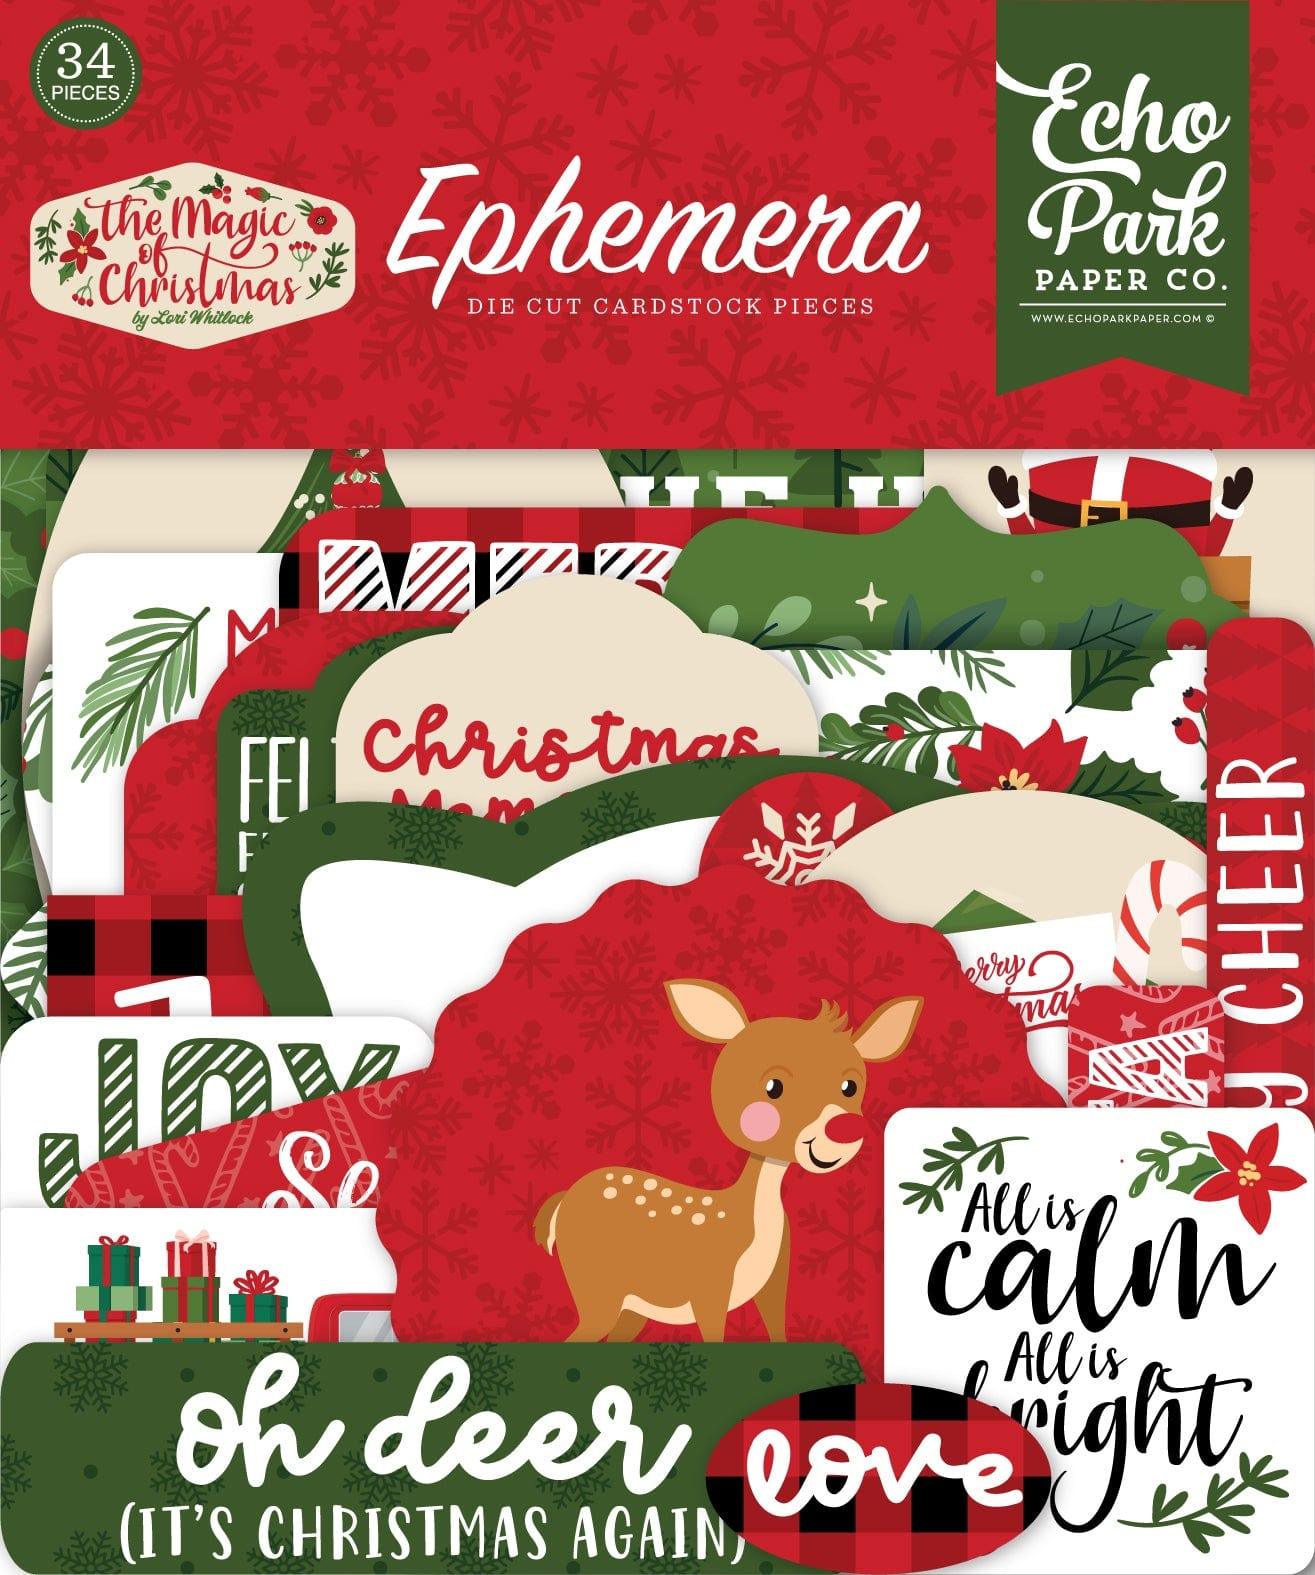 The Magic of Christmas Collection 5 x 5 Scrapbook Ephemera Die Cuts by Echo Park Paper - Scrapbook Supply Companies